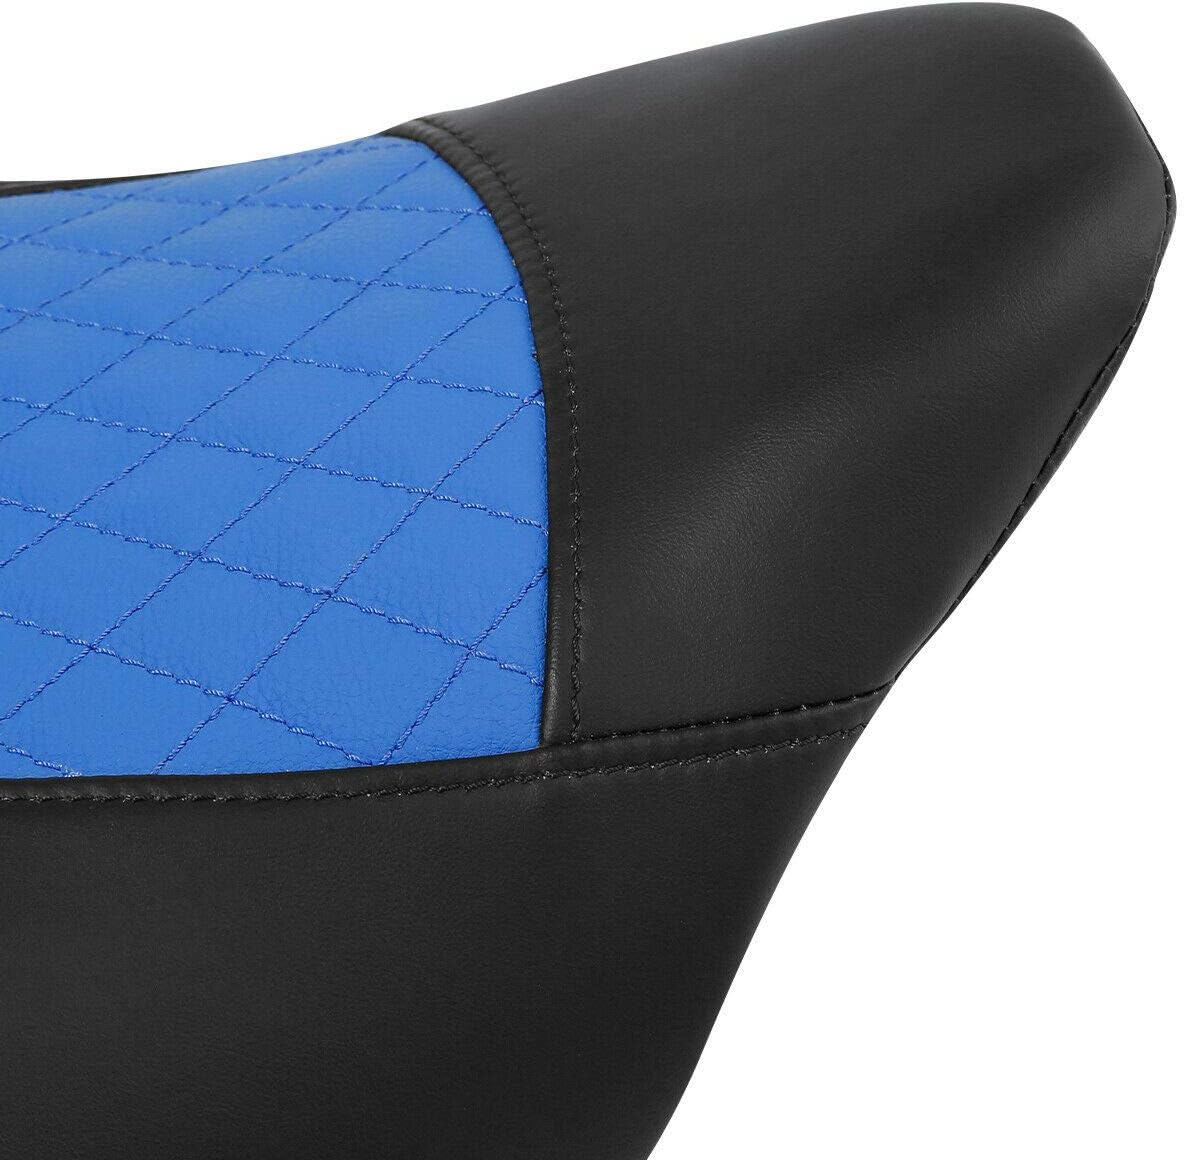 Driver Rear Passenger Seat For Harley Touring Road King Street Glide Electra Glide Road Glide 2009-2023 - Driver Rear Passenger Seat Review